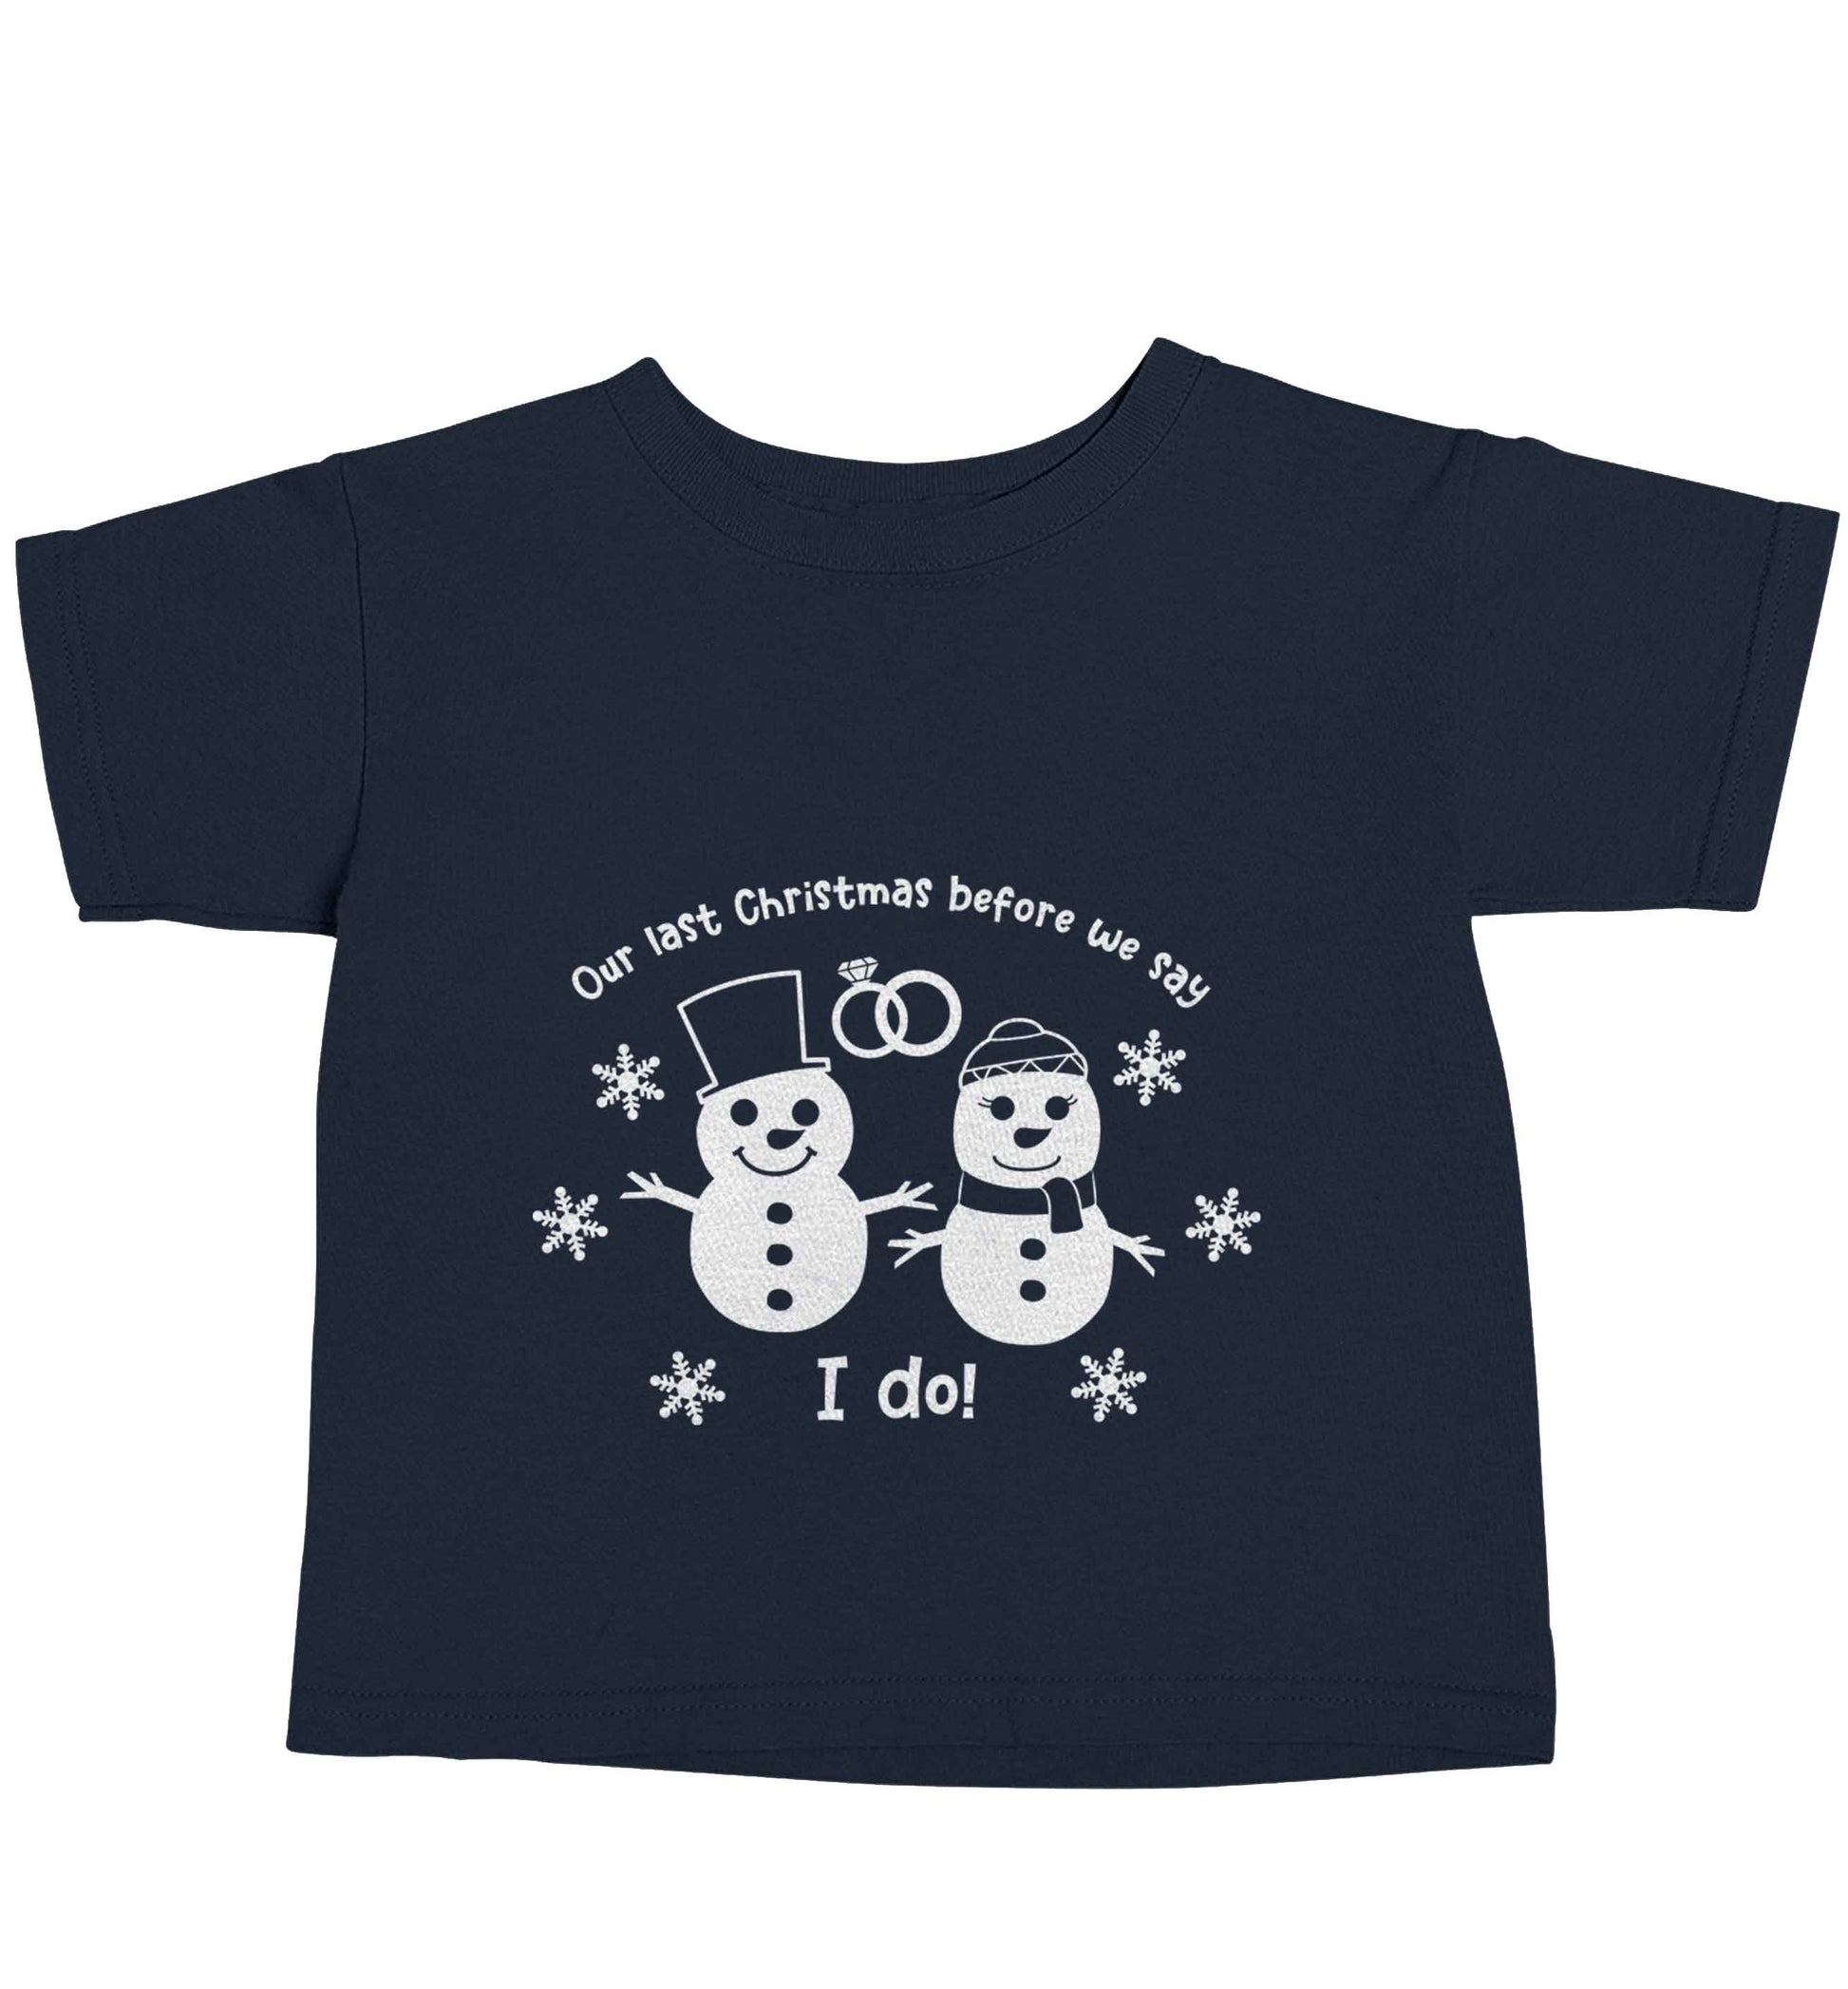 Last Christmas before we say I do navy baby toddler Tshirt 2 Years